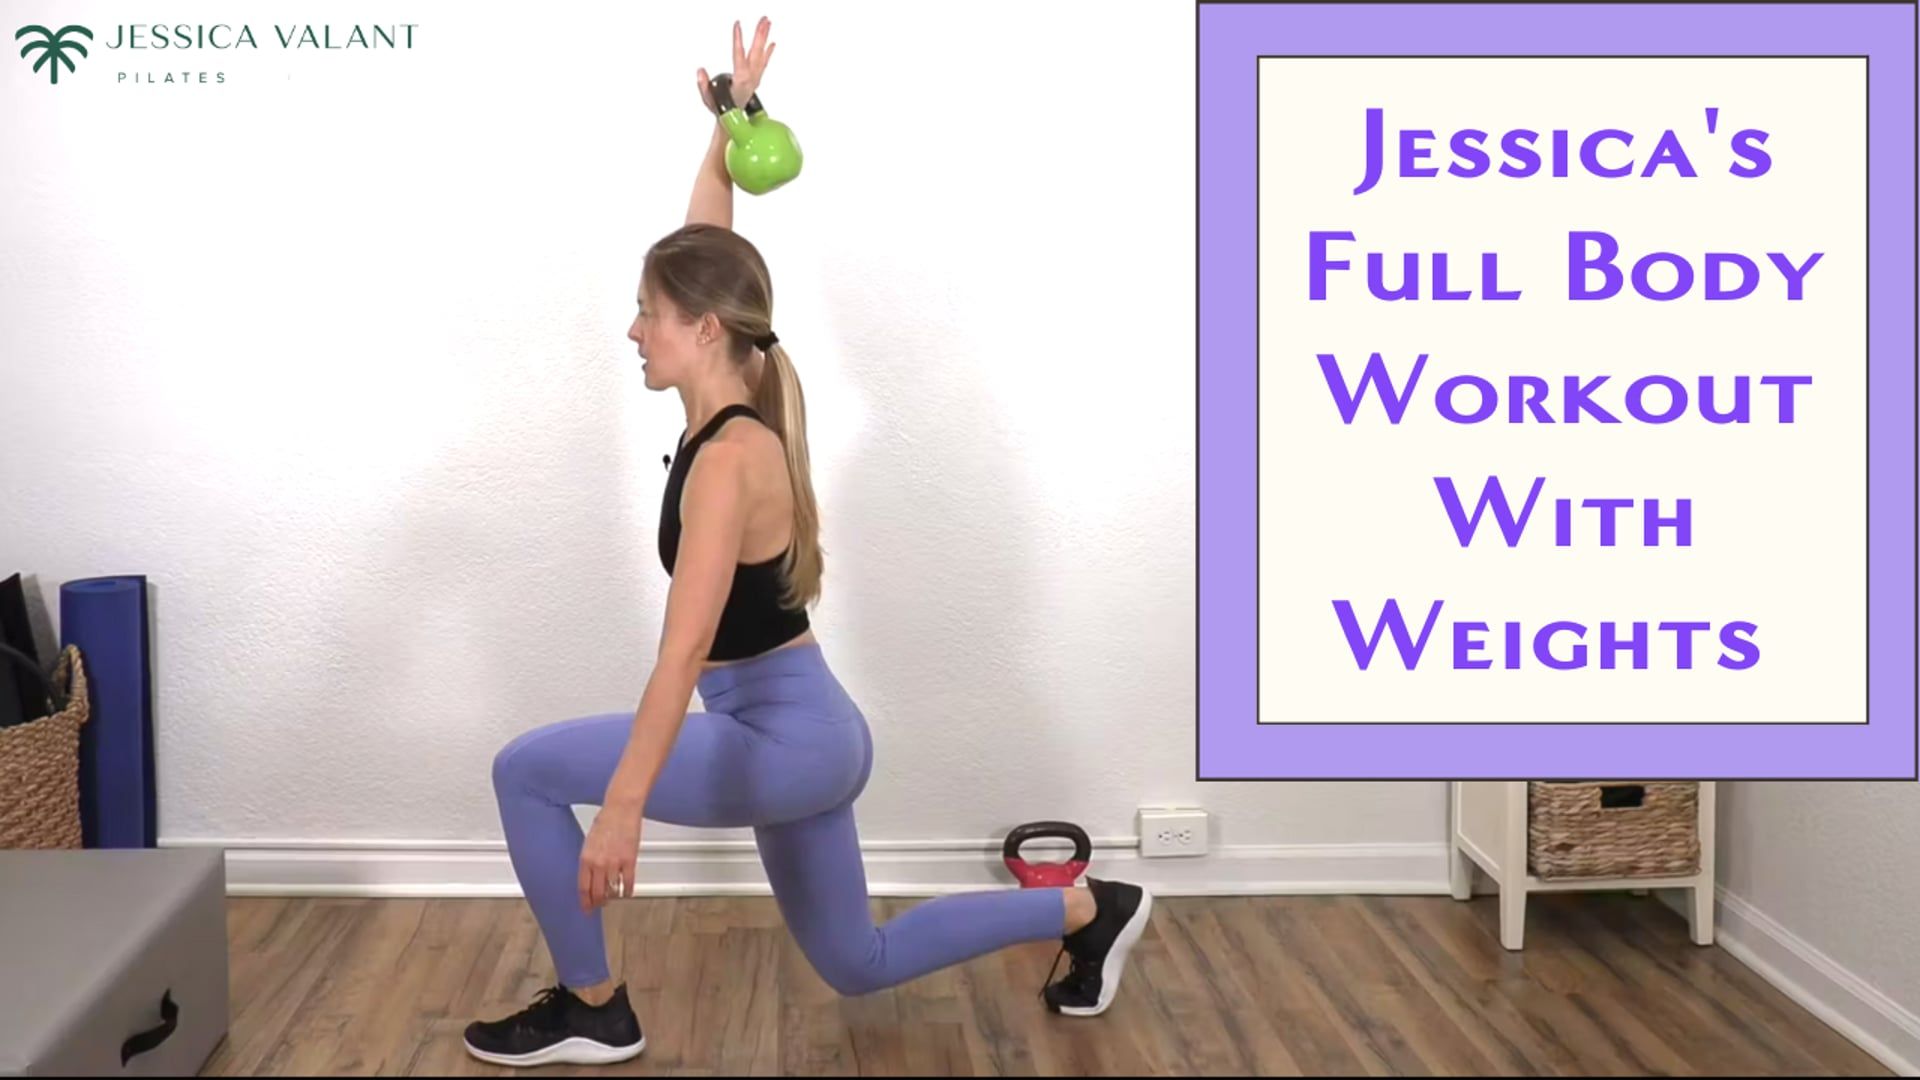 30 Minute Full Body Pilates Workout - Jessica's Personal Routine! - Jessica  Valant Pilates